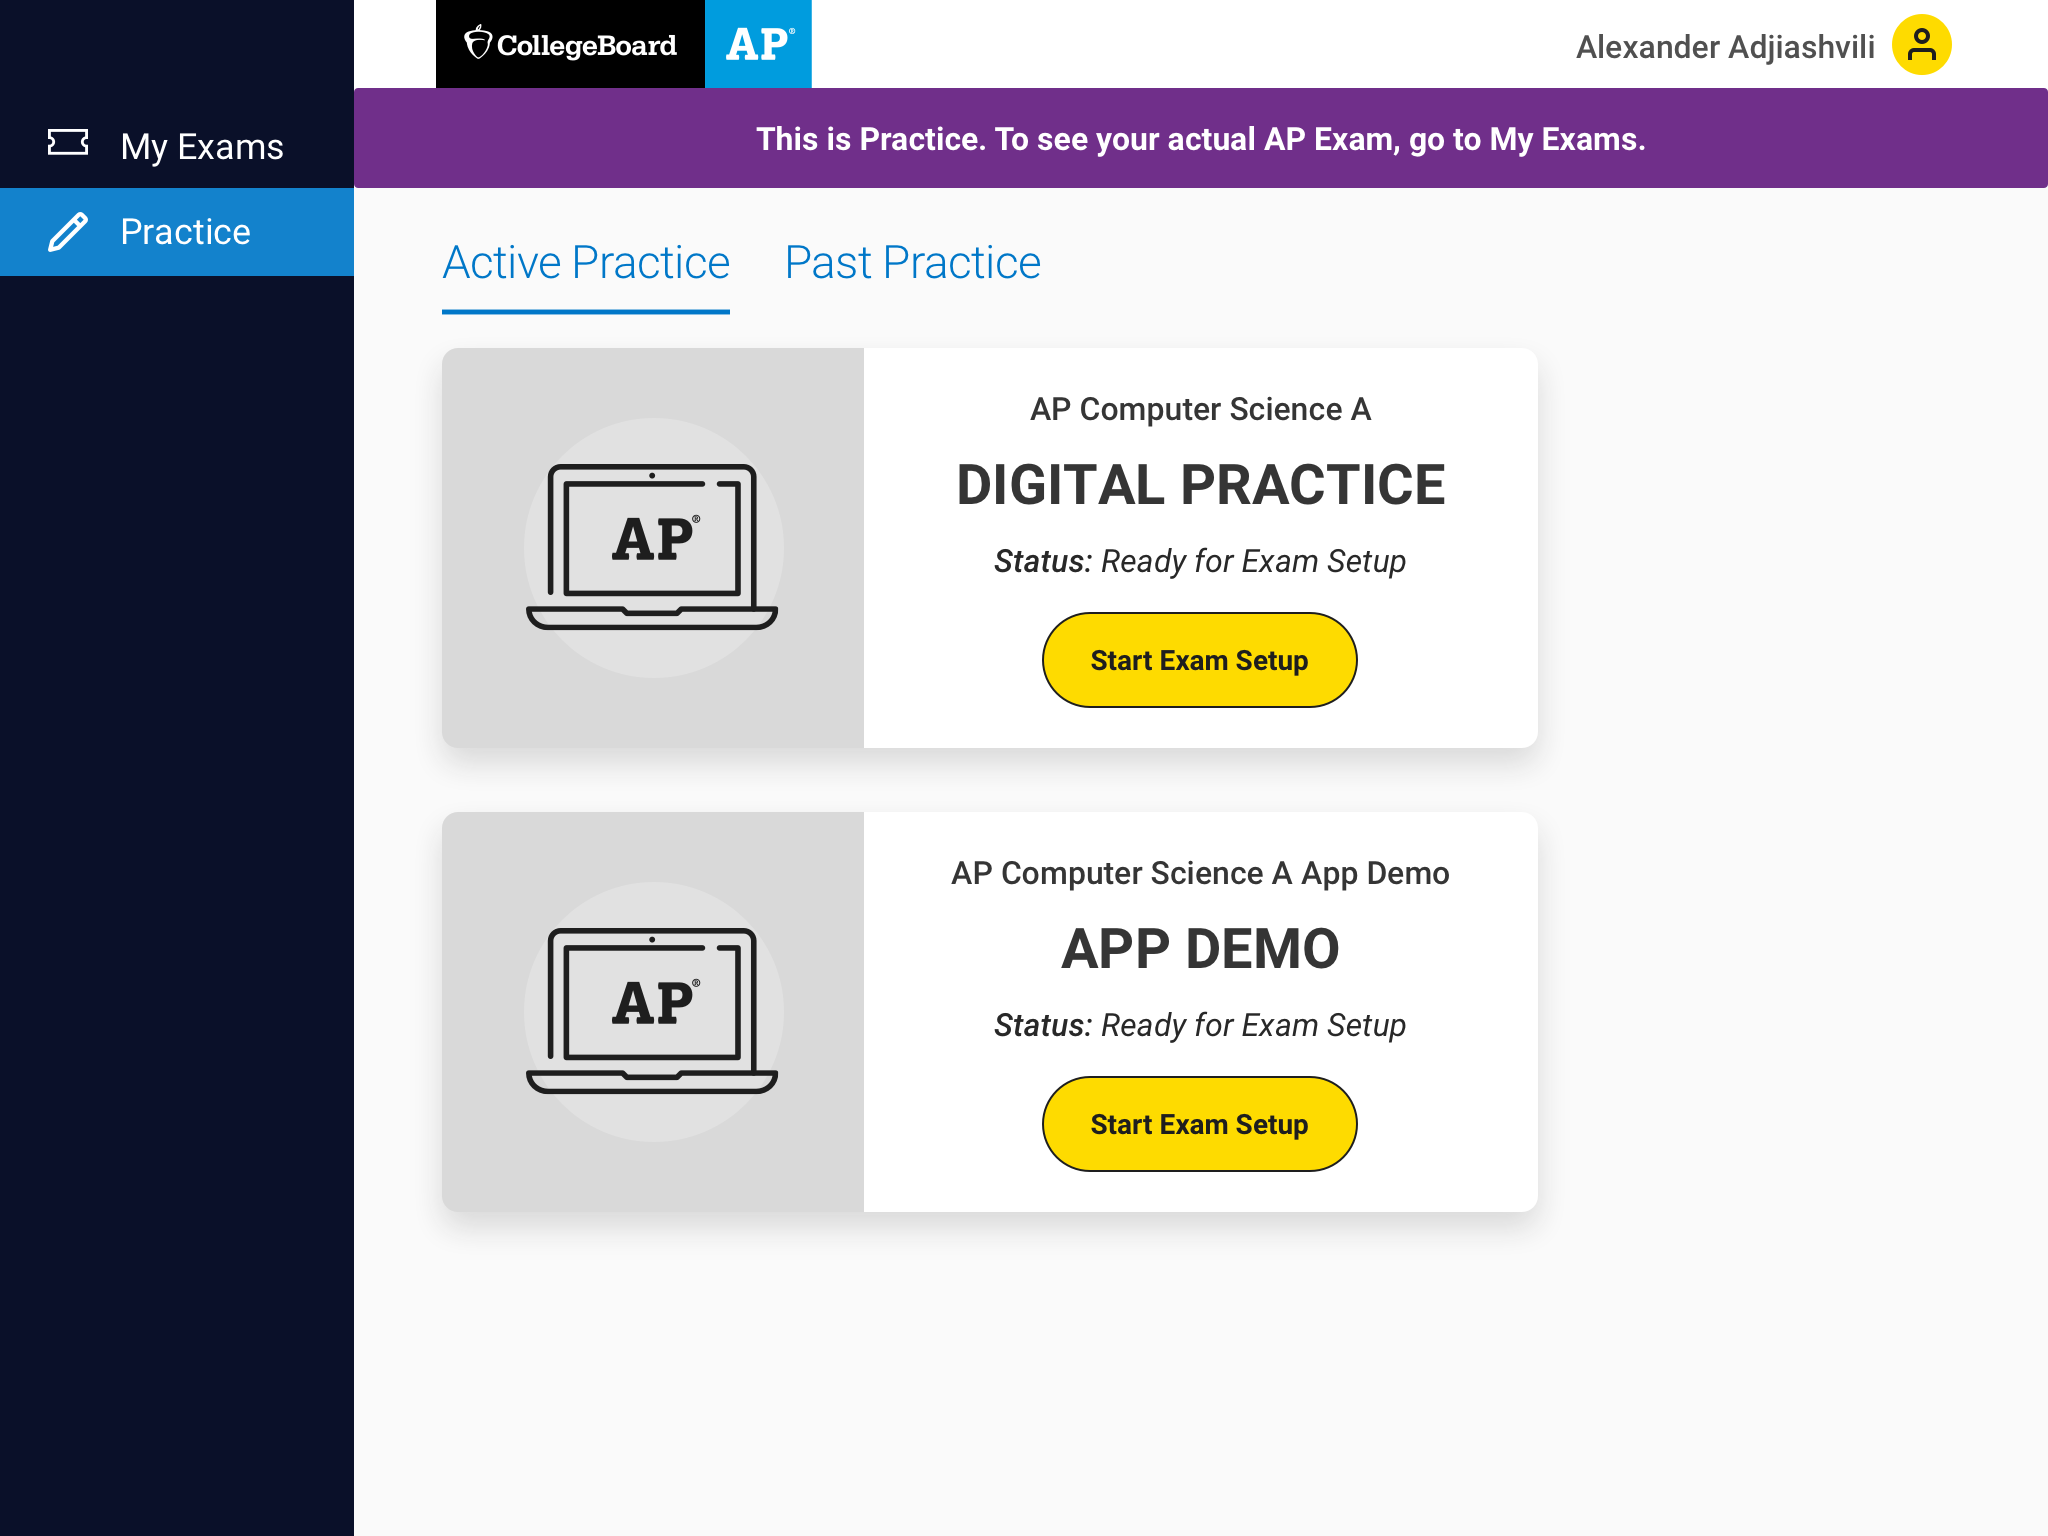 Students will have two options to practice for each exam: an app demo that has fewer questions, and a digital practice that has more questions. 